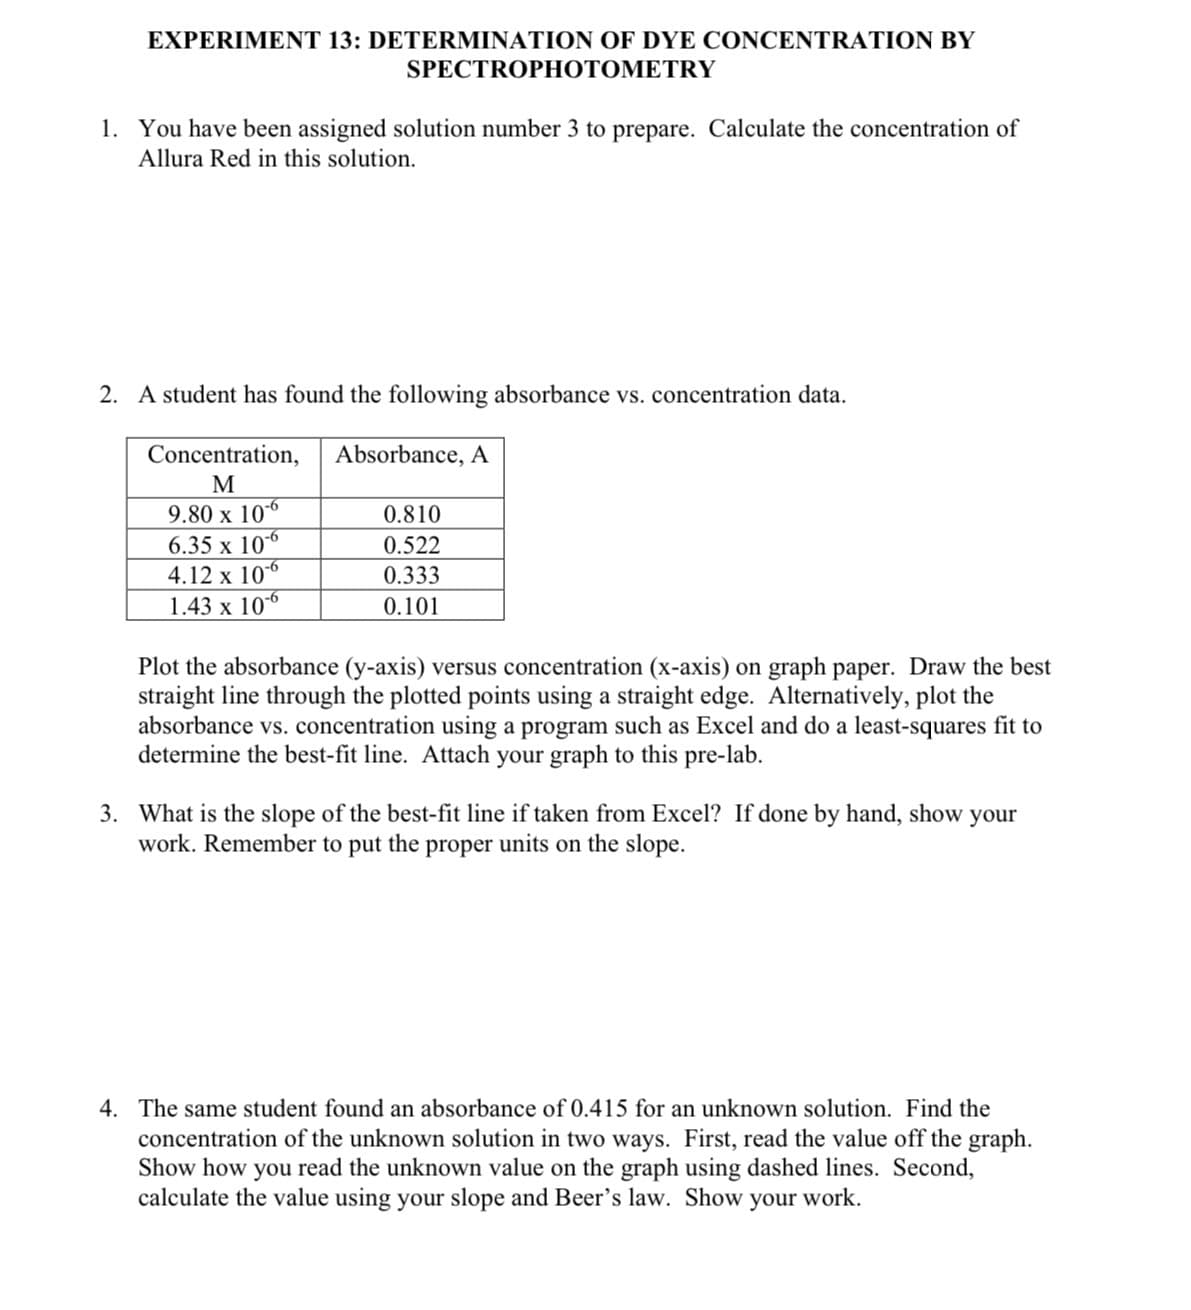 EXPERIMENT 13: DETERMINATION OF DYE CONCENTRATION BY
SPECTROPHOTOMETRY
1. You have been assigned solution number 3 to prepare. Calculate the concentration of
Allura Red in this solution.
2. A student has found the following absorbance vs. concentration data.
Concentration,
M
9.80 x 10-6
6.35 x 10-6
4.12 x 10-6
1.43 x 10-6
Absorbance, A
0.810
0.522
0.333
0.101
Plot the absorbance (y-axis) versus concentration (x-axis) on graph paper. Draw the best
straight line through the plotted points using a straight edge. Alternatively, plot the
absorbance vs. concentration using a program such as Excel and do a least-squares fit to
determine the best-fit line. Attach your graph to this pre-lab.
3. What is the slope of the best-fit line if taken from Excel? If done by hand, show your
work. Remember to put the proper units on the slope.
4. The same student found an absorbance of 0.415 for an unknown solution. Find the
concentration of the unknown solution in two ways. First, read the value off the graph.
Show how you read the unknown value on the graph using dashed lines. Second,
calculate the value using your slope and Beer's law. Show your work.